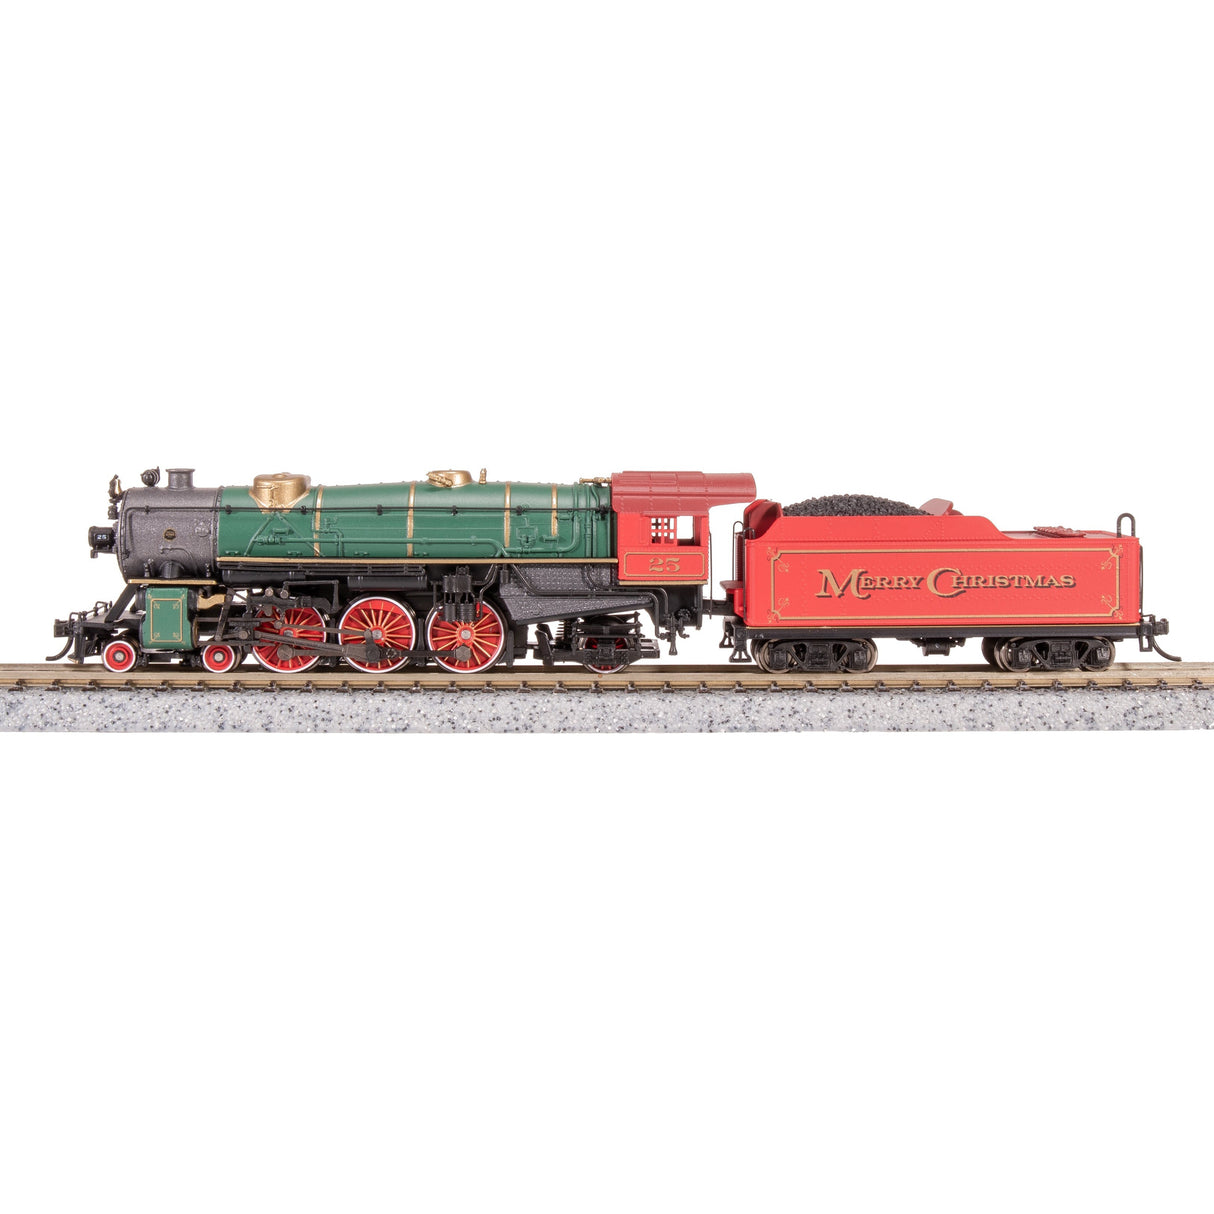 Broadway Limited N Scale USRA 4-6-2 Hvy.Pacific Steam Locomotive Christmas #25 DC/DCC